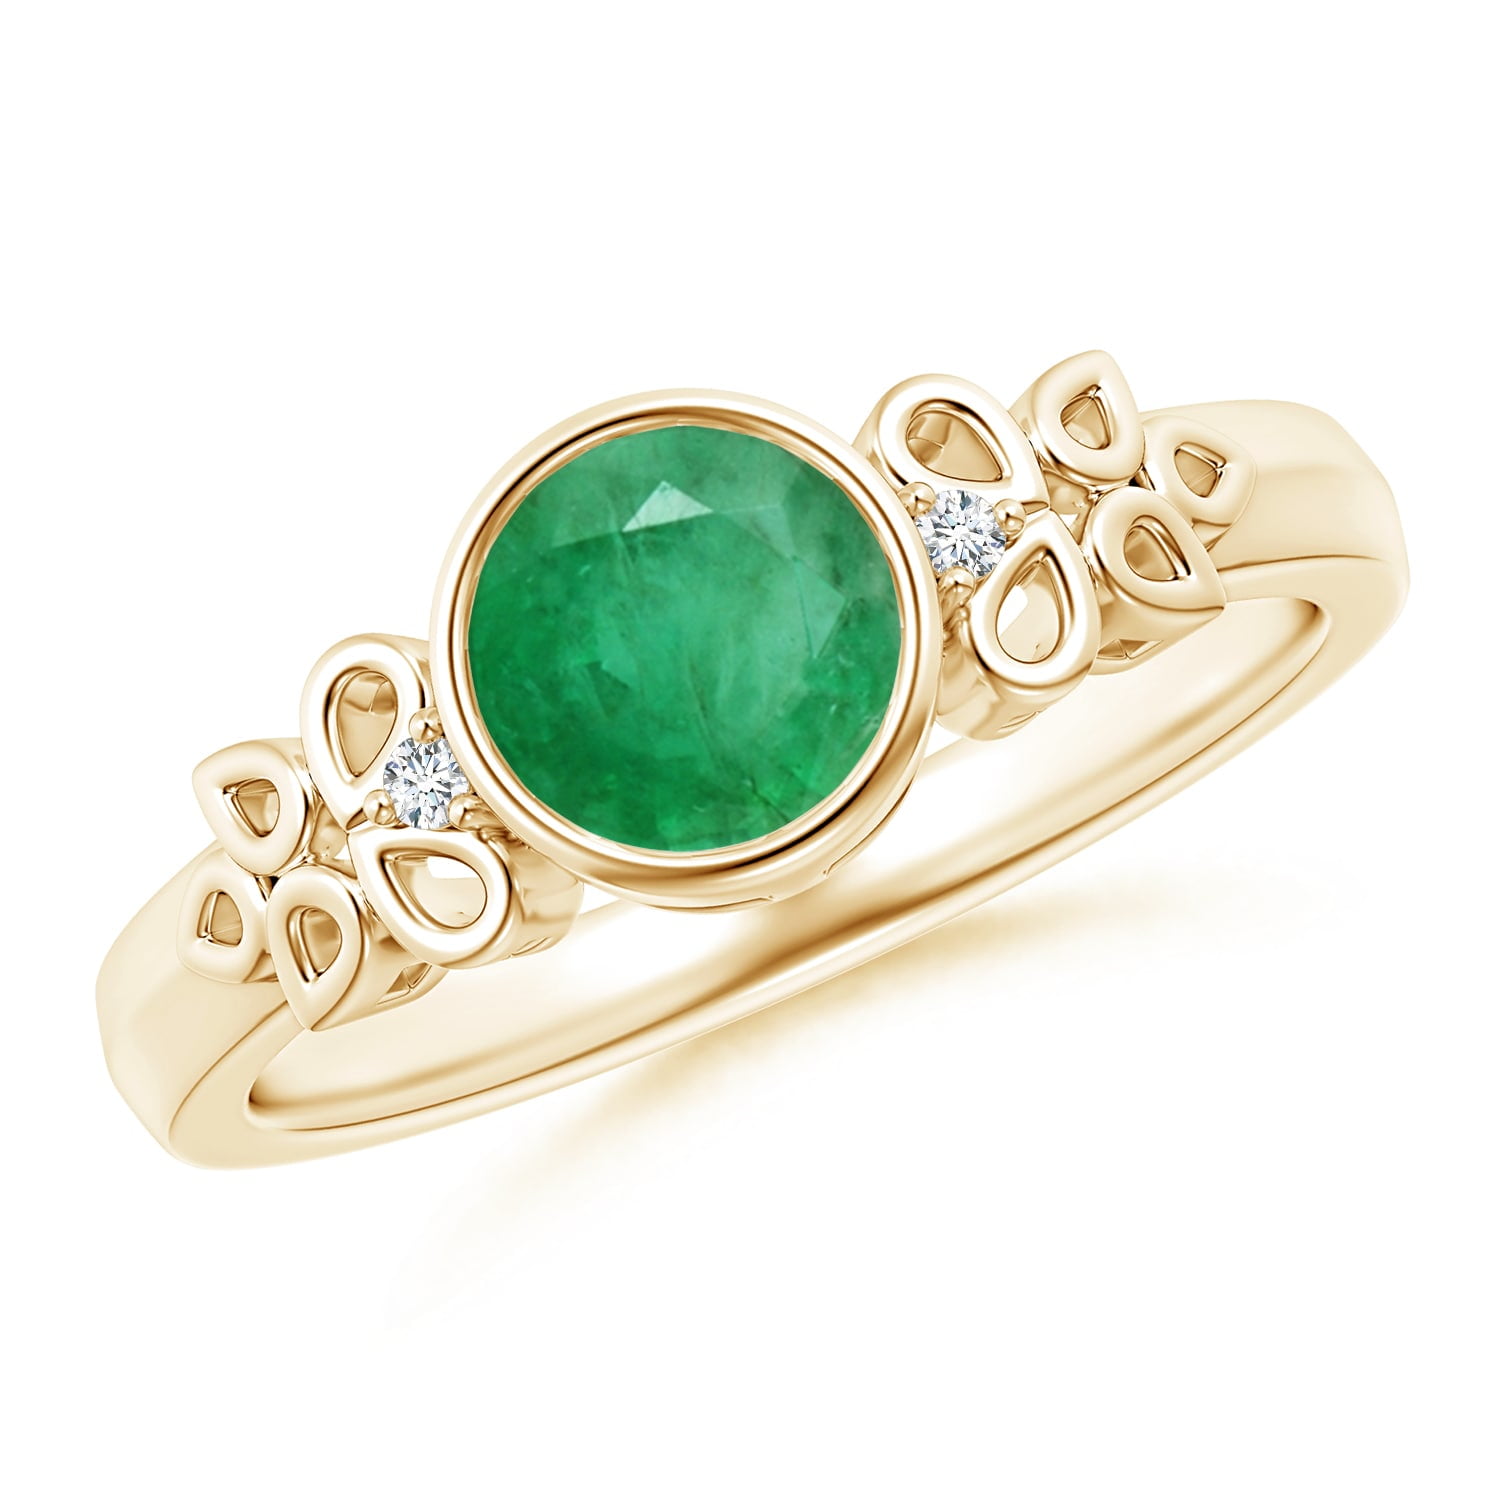 Angara - May Birthstone Ring - Vintage Style Round Emerald Ring with ...